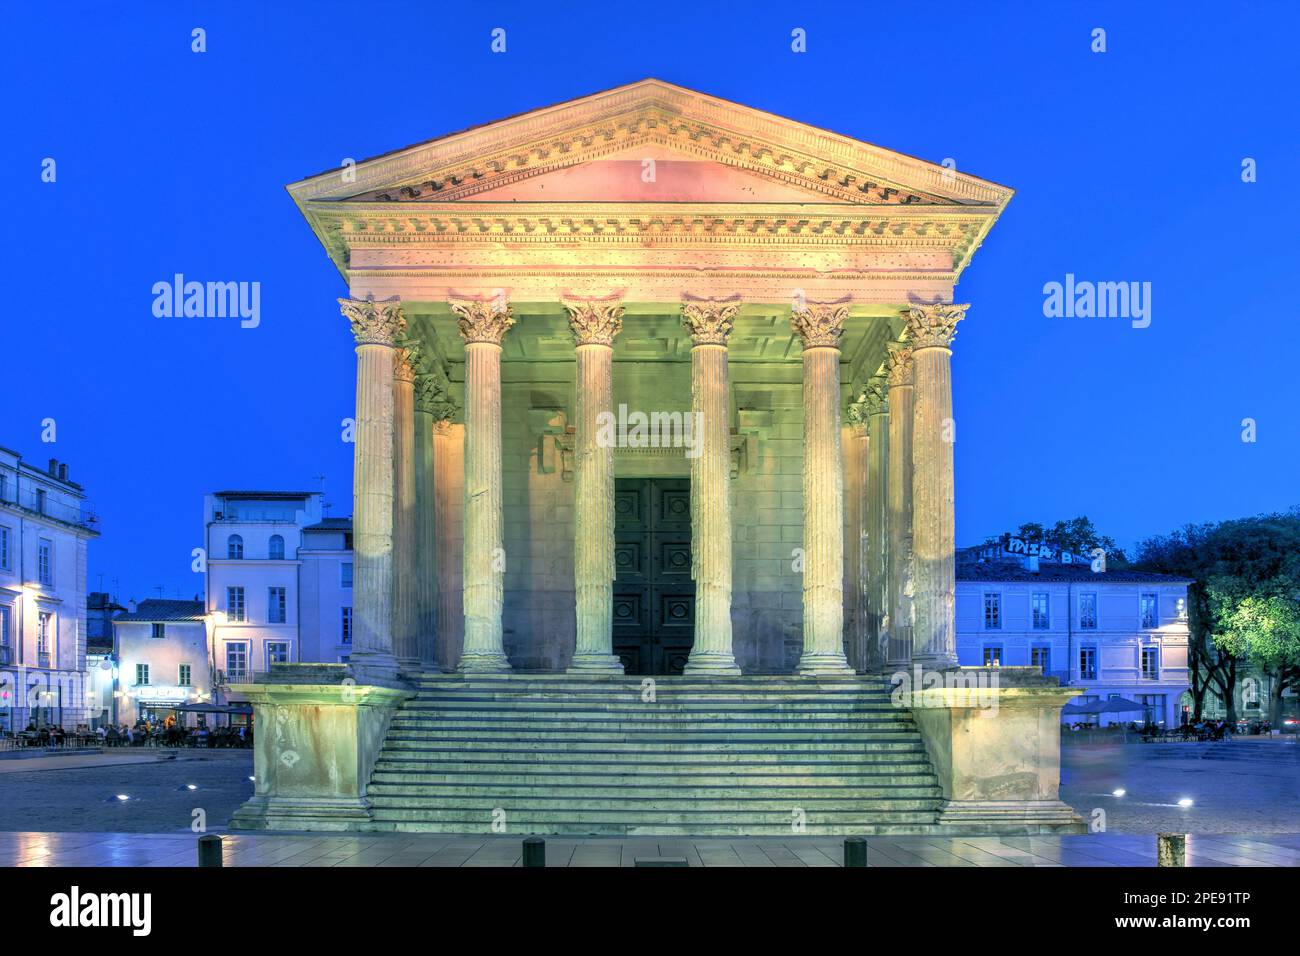 Maison carrée in Nîmes, southern France is one of the most well preserved Roman temples in existance dating back to year 2 AD, originally dedicated to Stock Photo